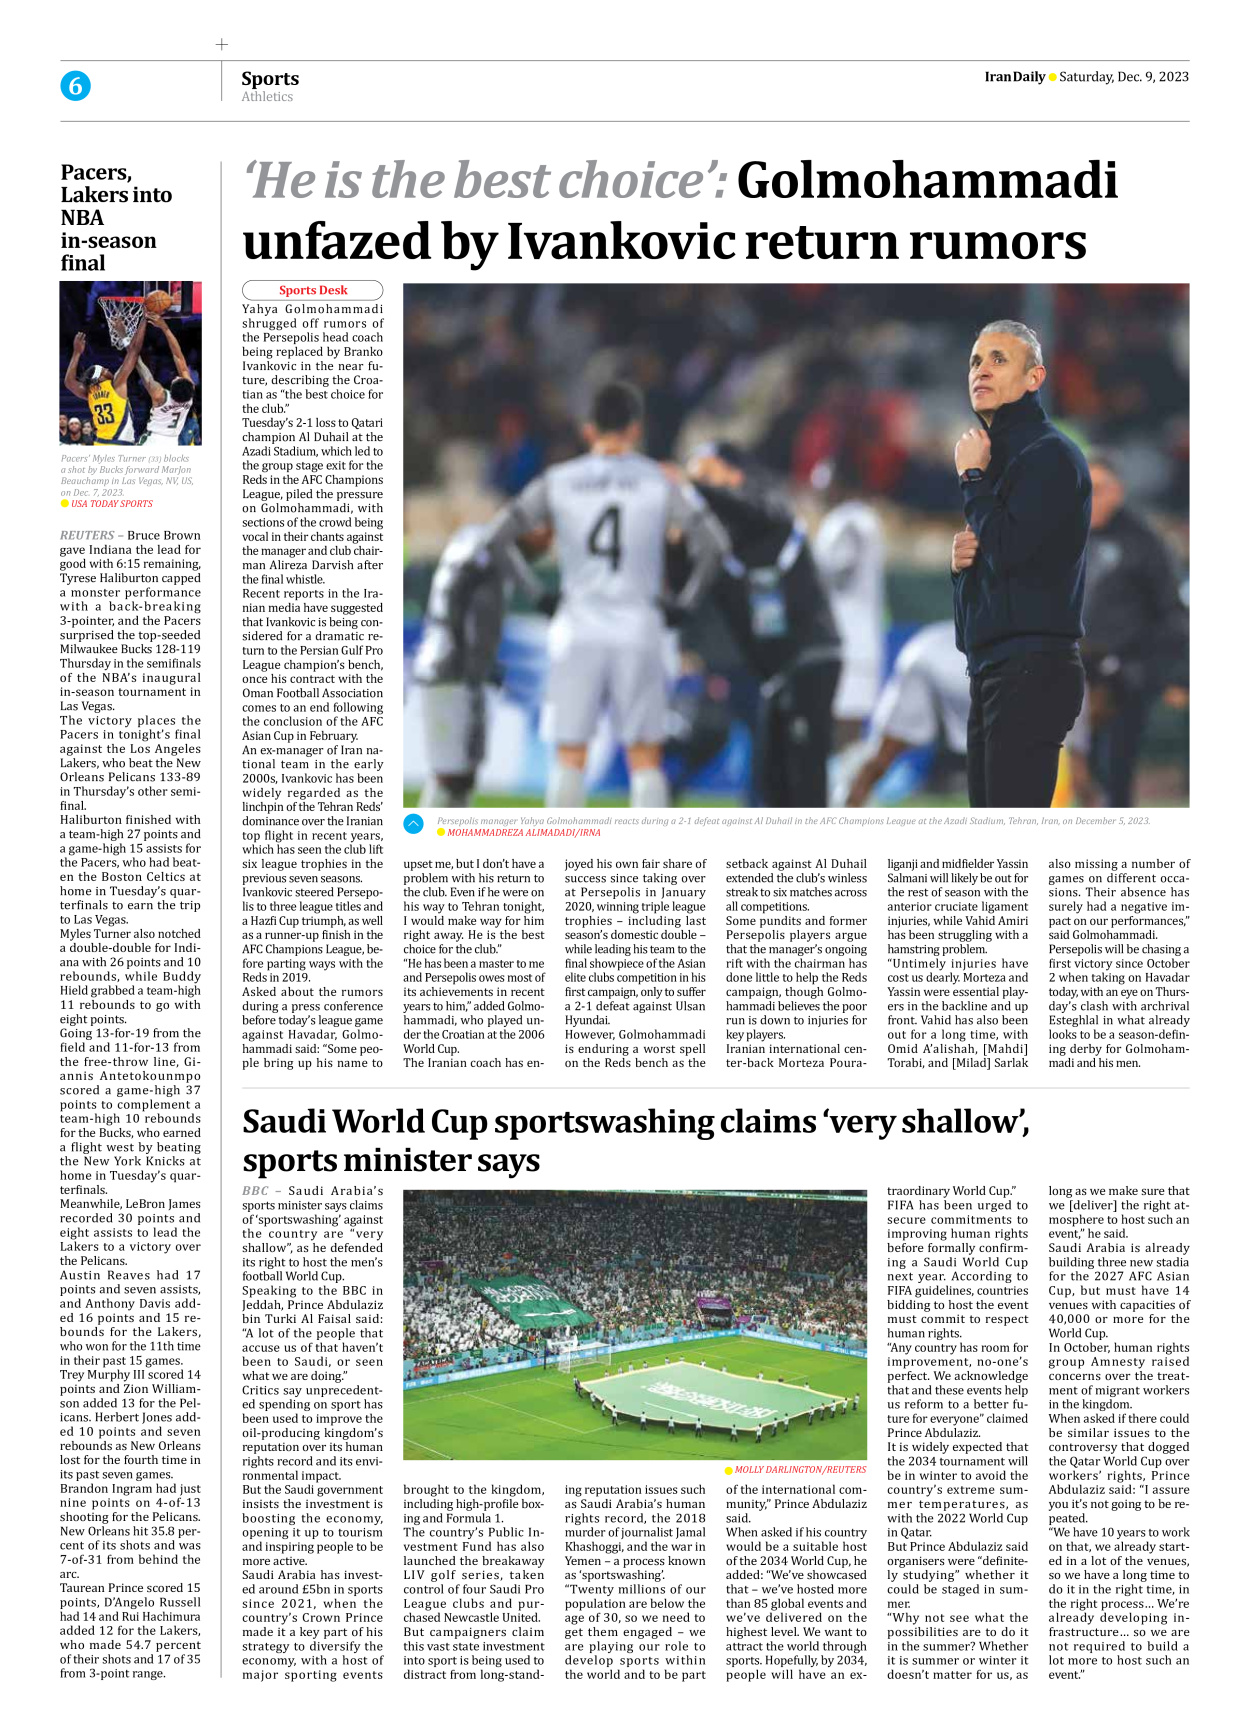 Iran Daily - Number Seven Thousand Four Hundred and Fifty Five - 09 December 2023 - Page 6